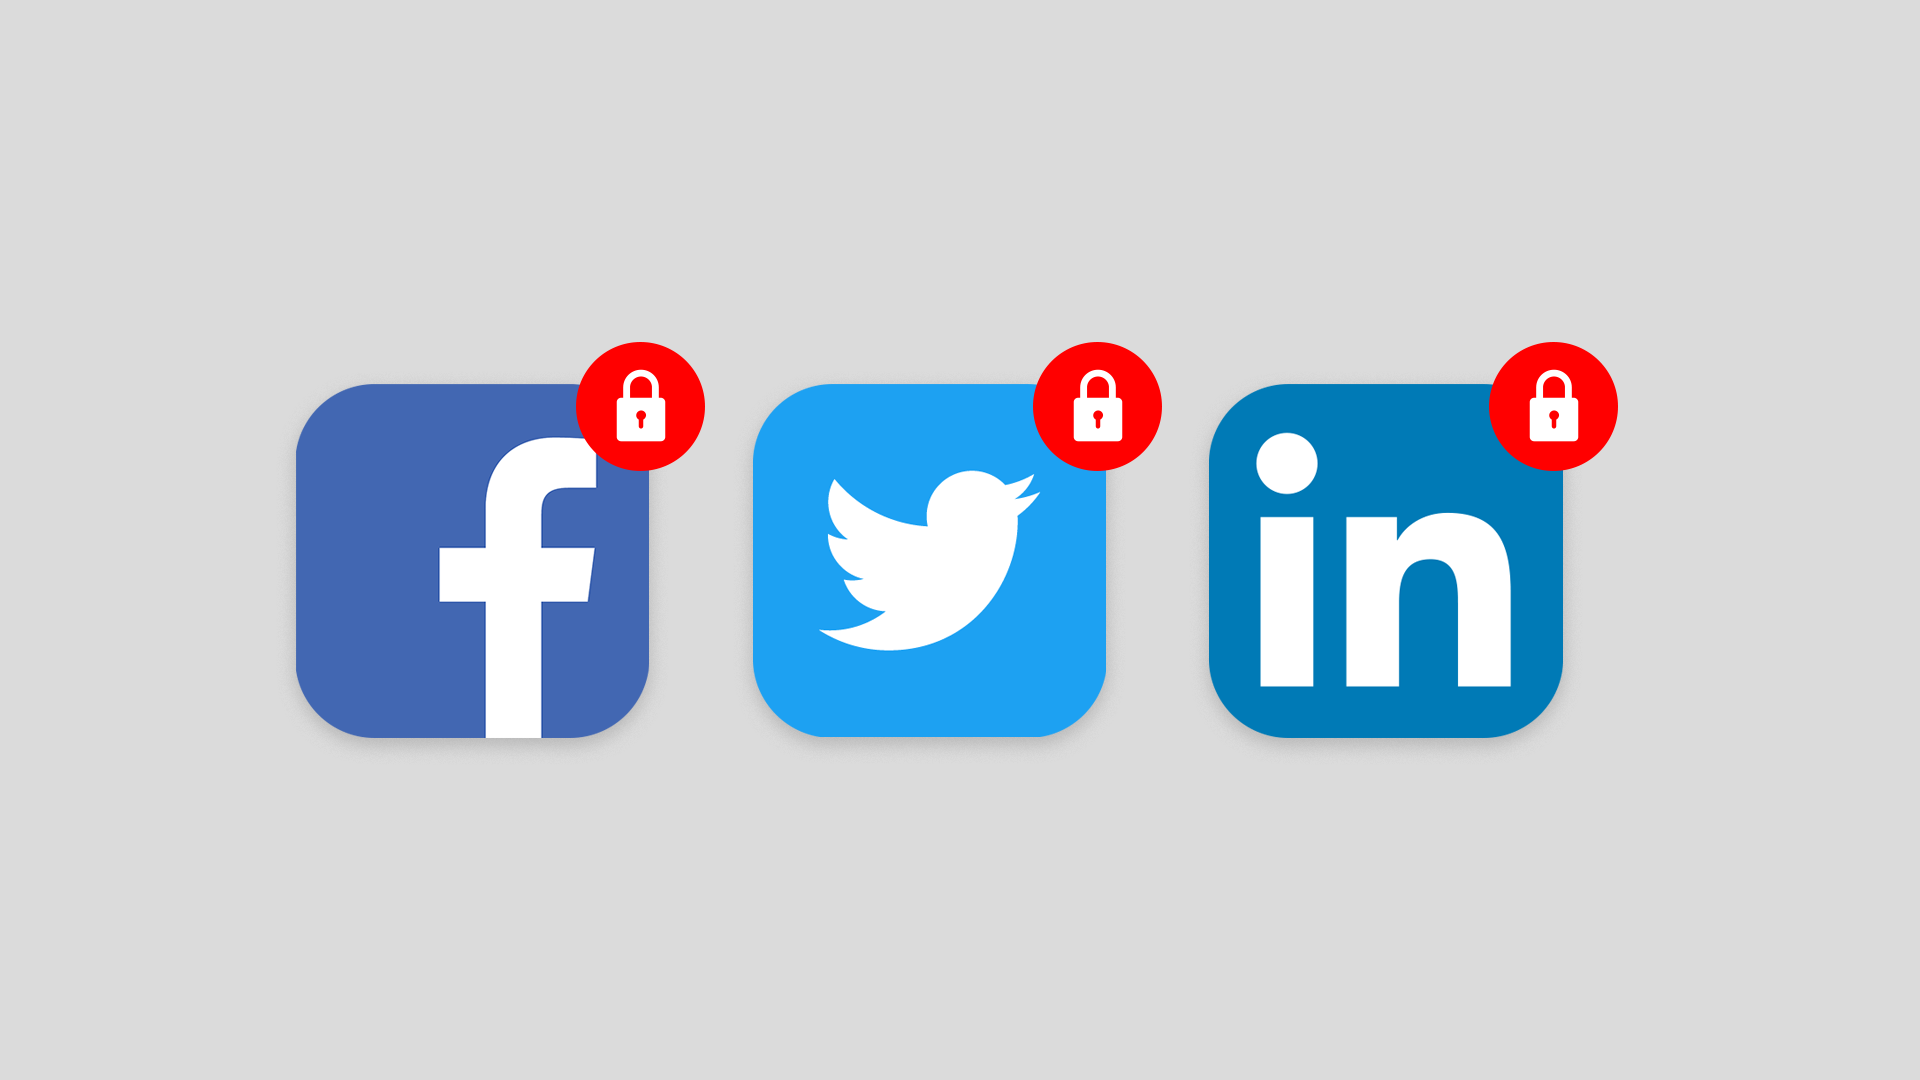 This illustration shows the Facebook, Twitter, and Linkedin logos.